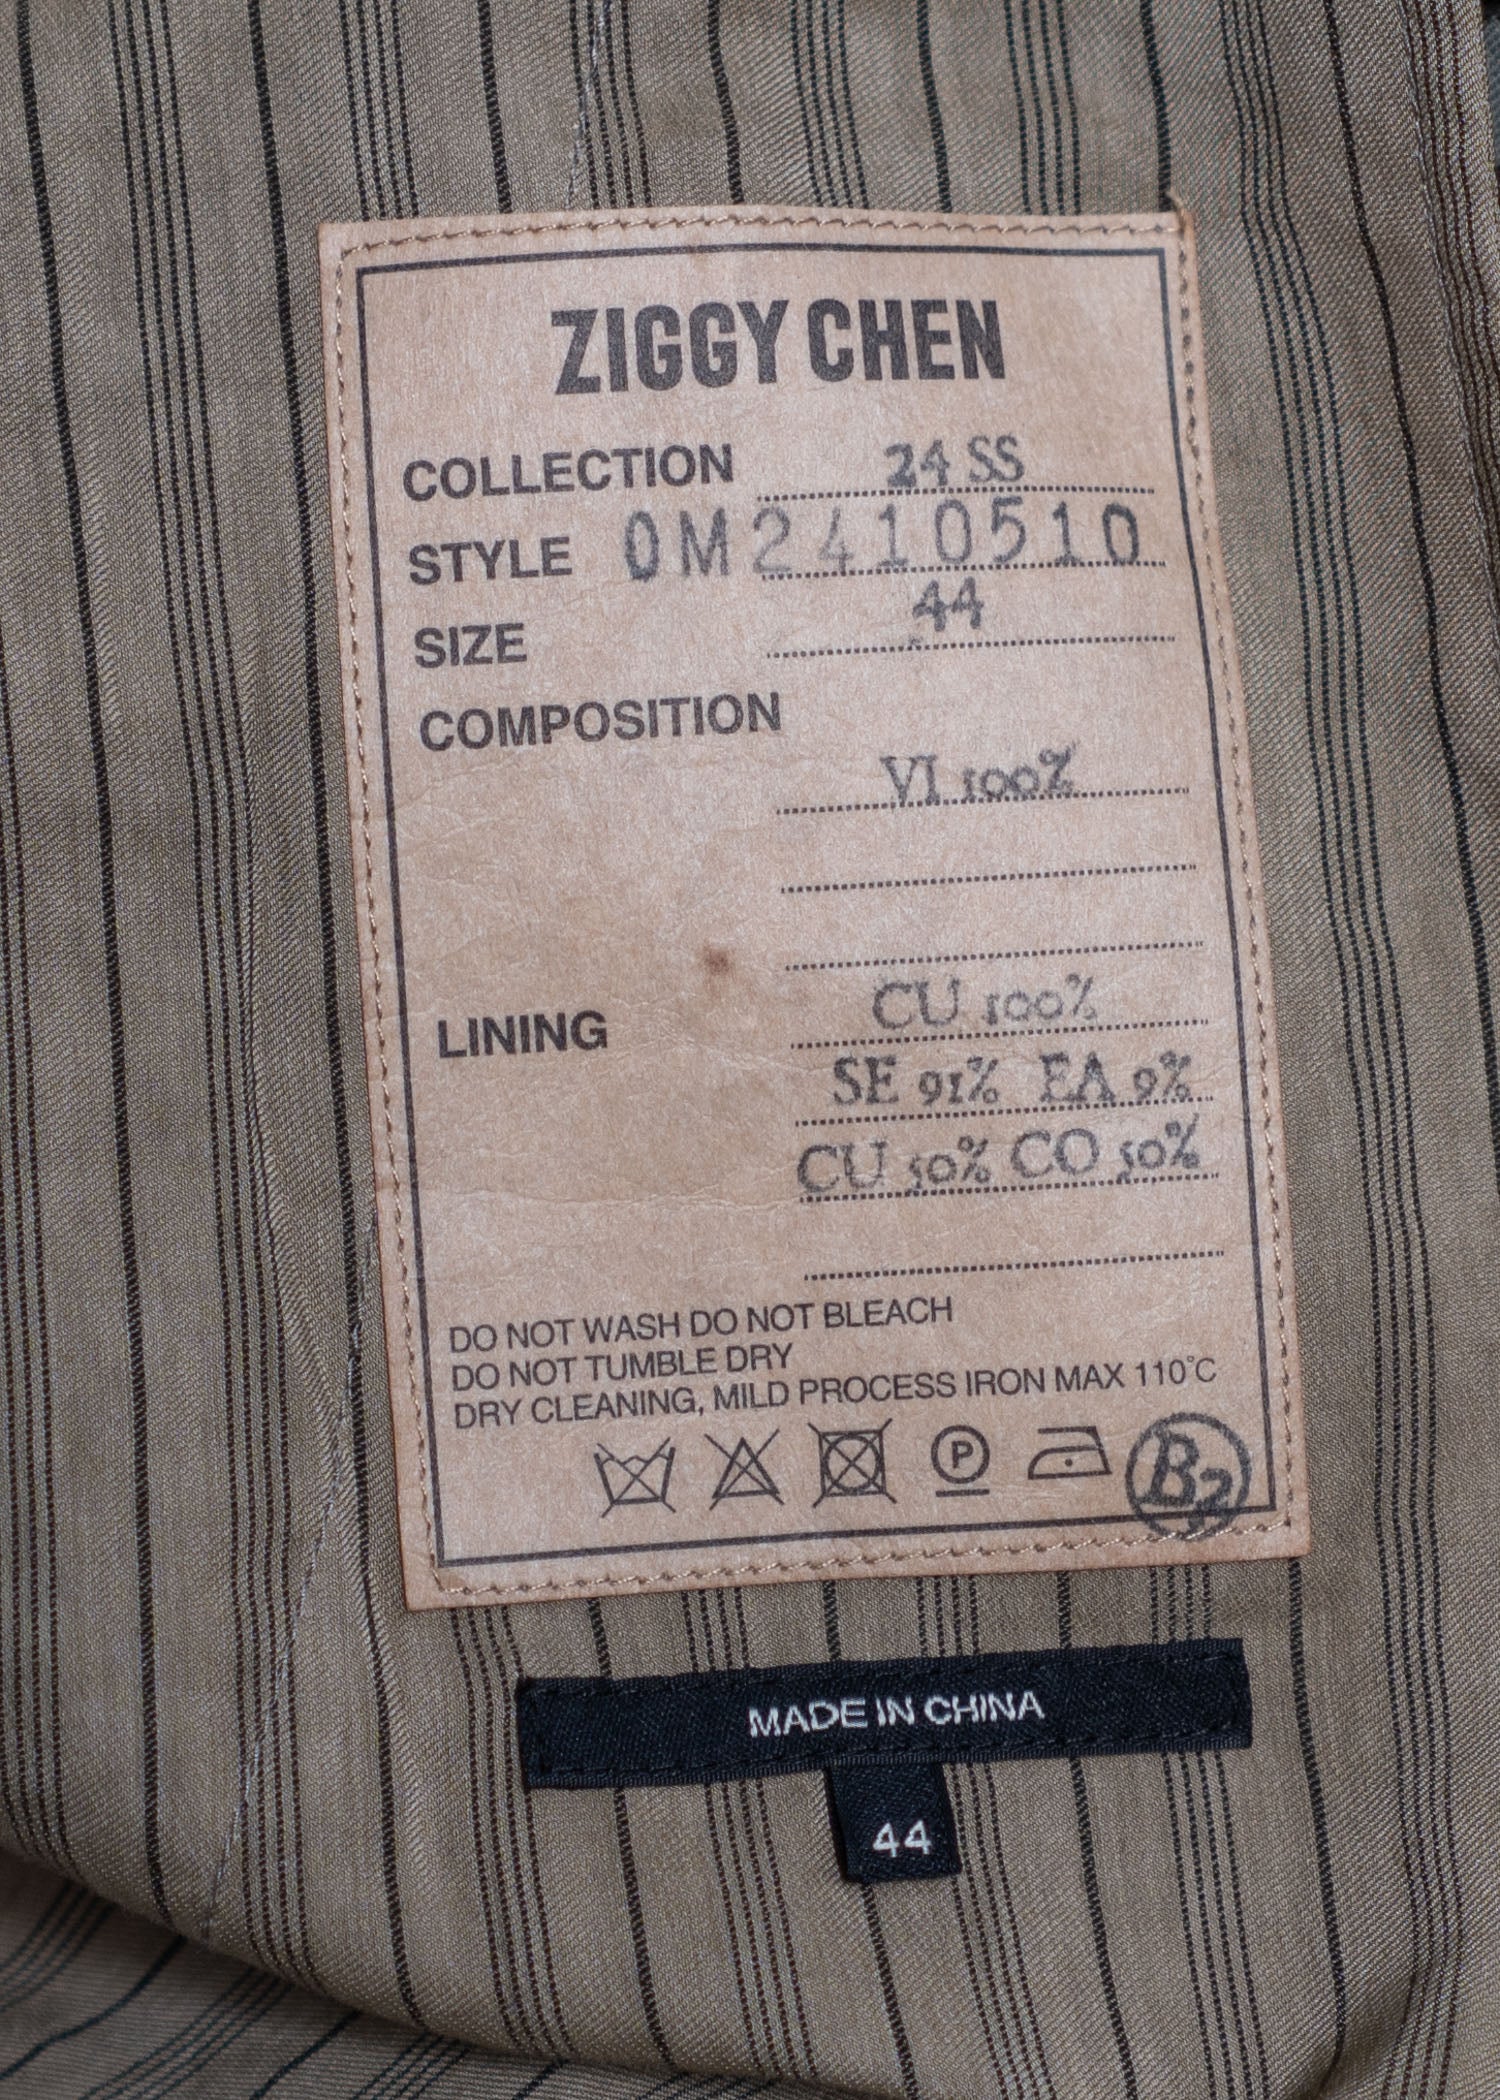 ZIGGY CHEN FRONT PLEATS TAPERED LONG TROUSERS 0M2410510